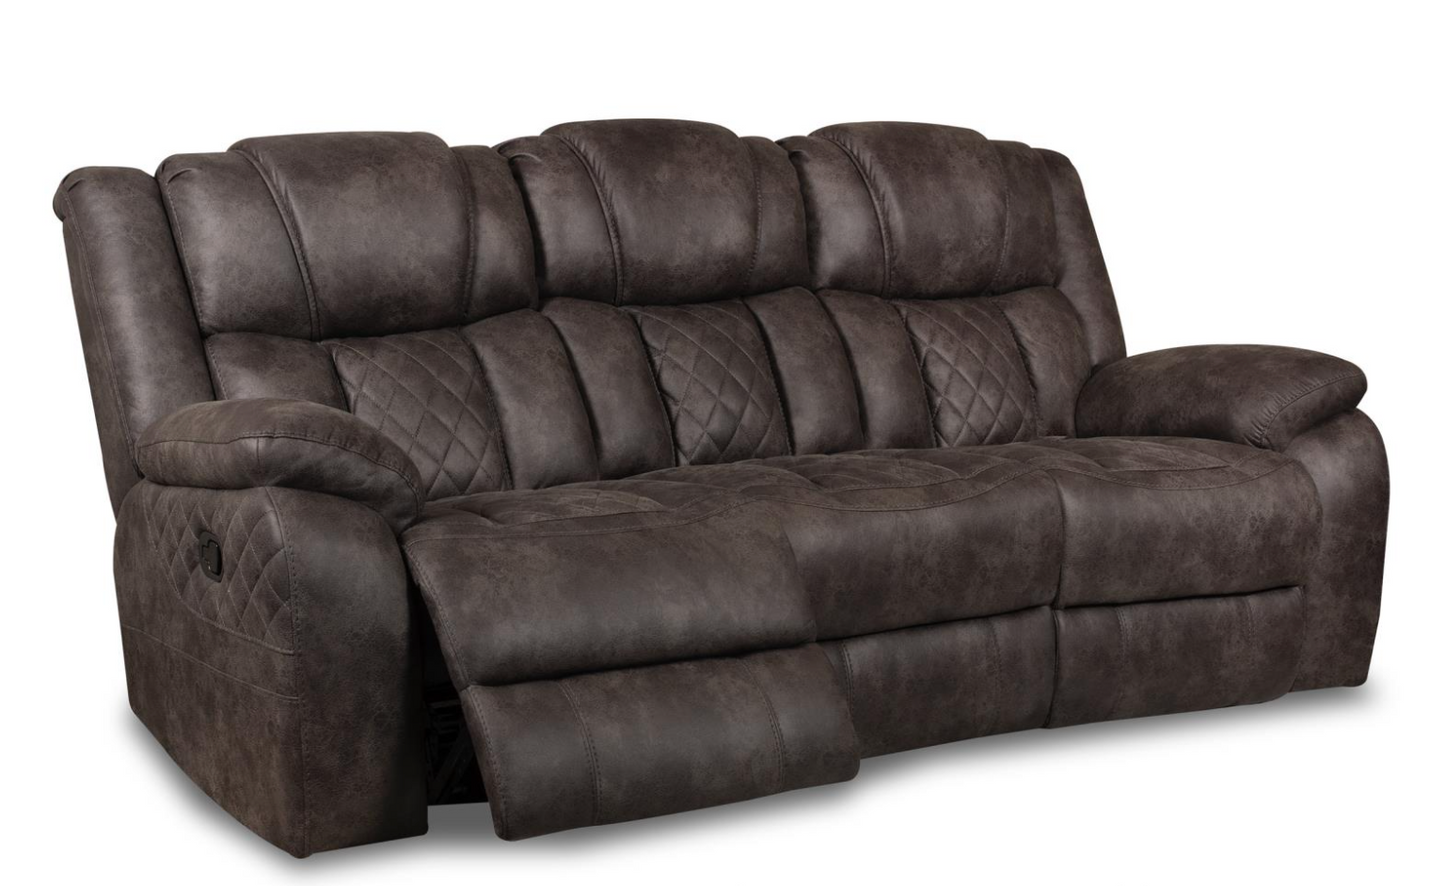 WEEKLY or MONTHLY. Tundra Ash Couch and Loveseat